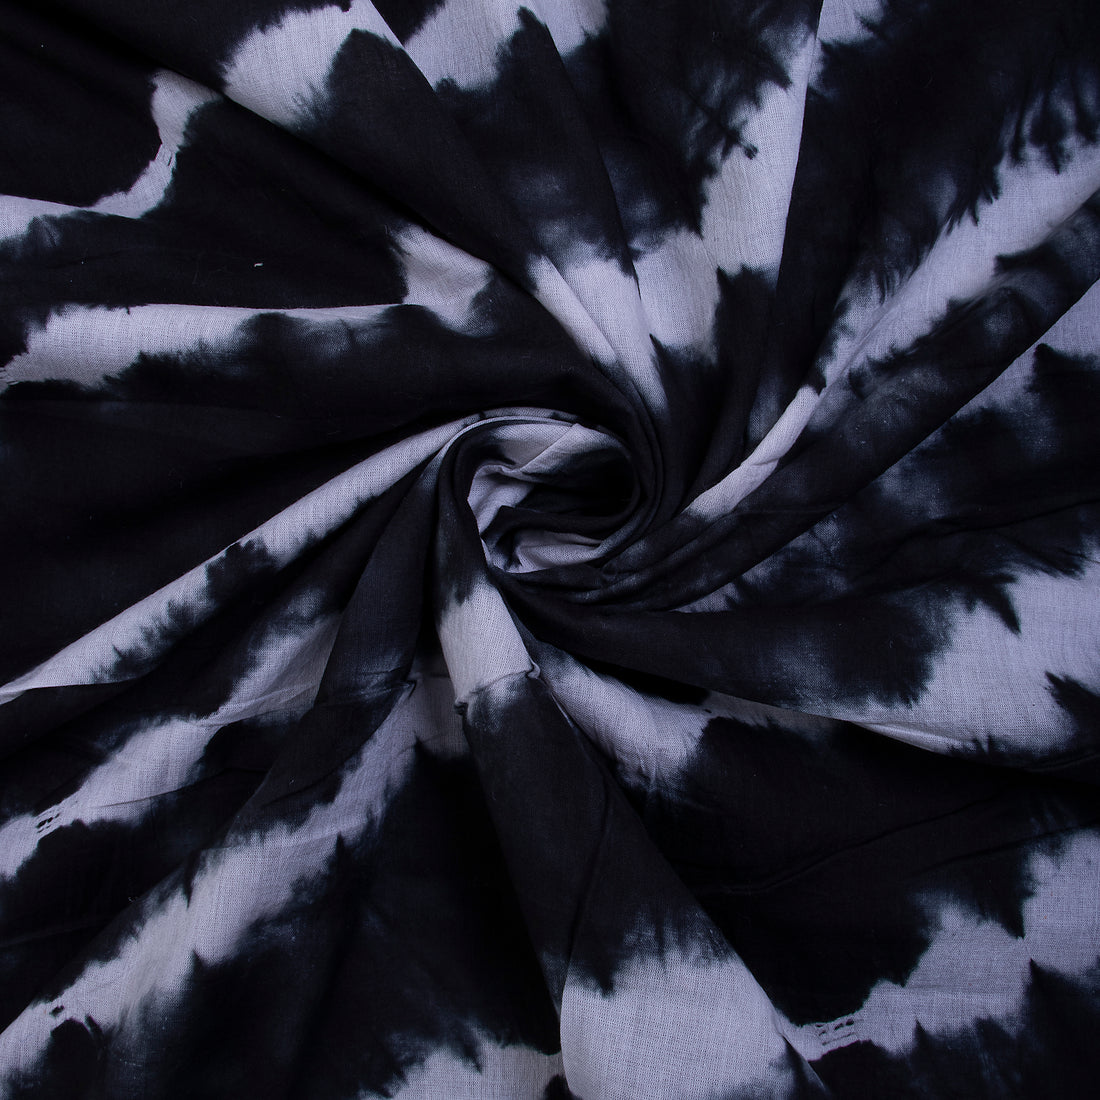 Black Tie Dye Cotton Fabric For Dress Material Online